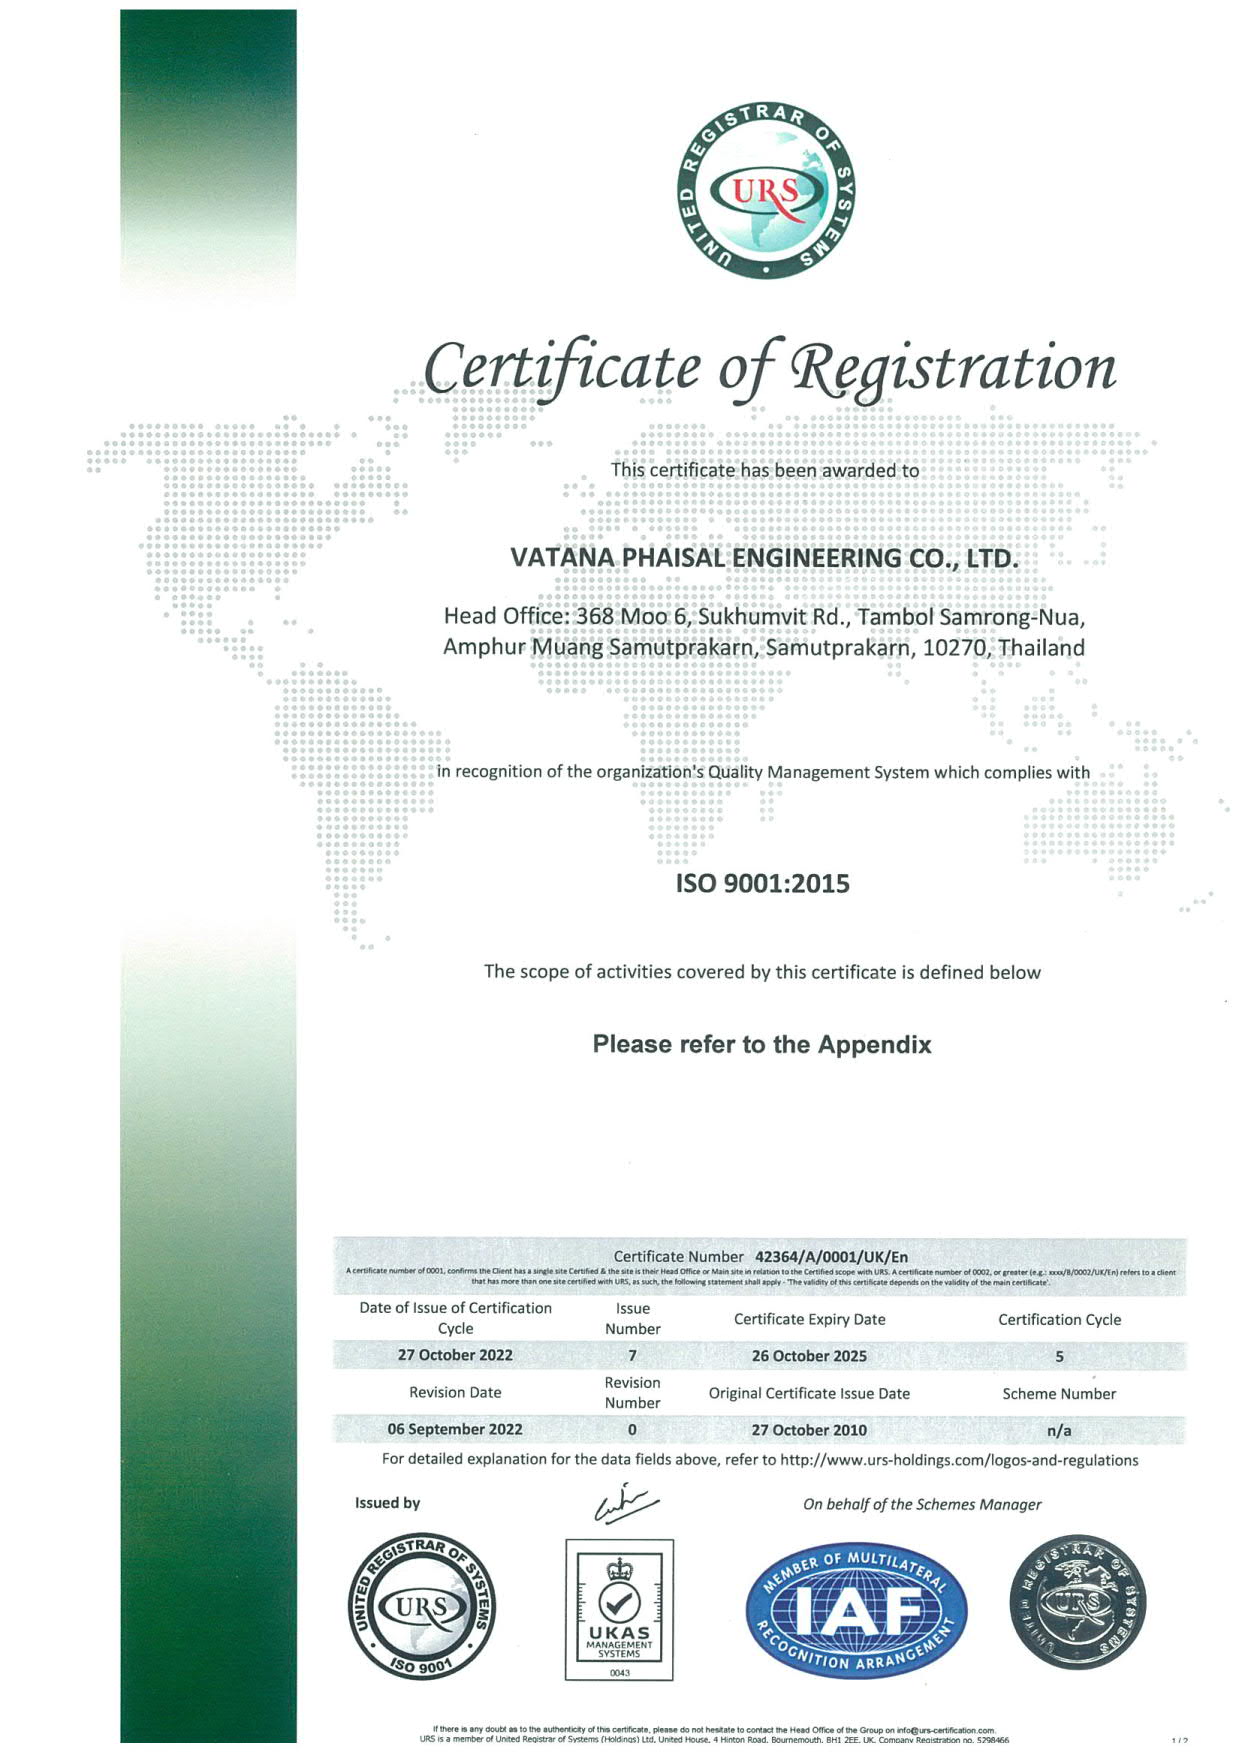 http://www.vpe.co.th/data/content/1354/cms/ISO9001-2015_HO_2025_1.jpg